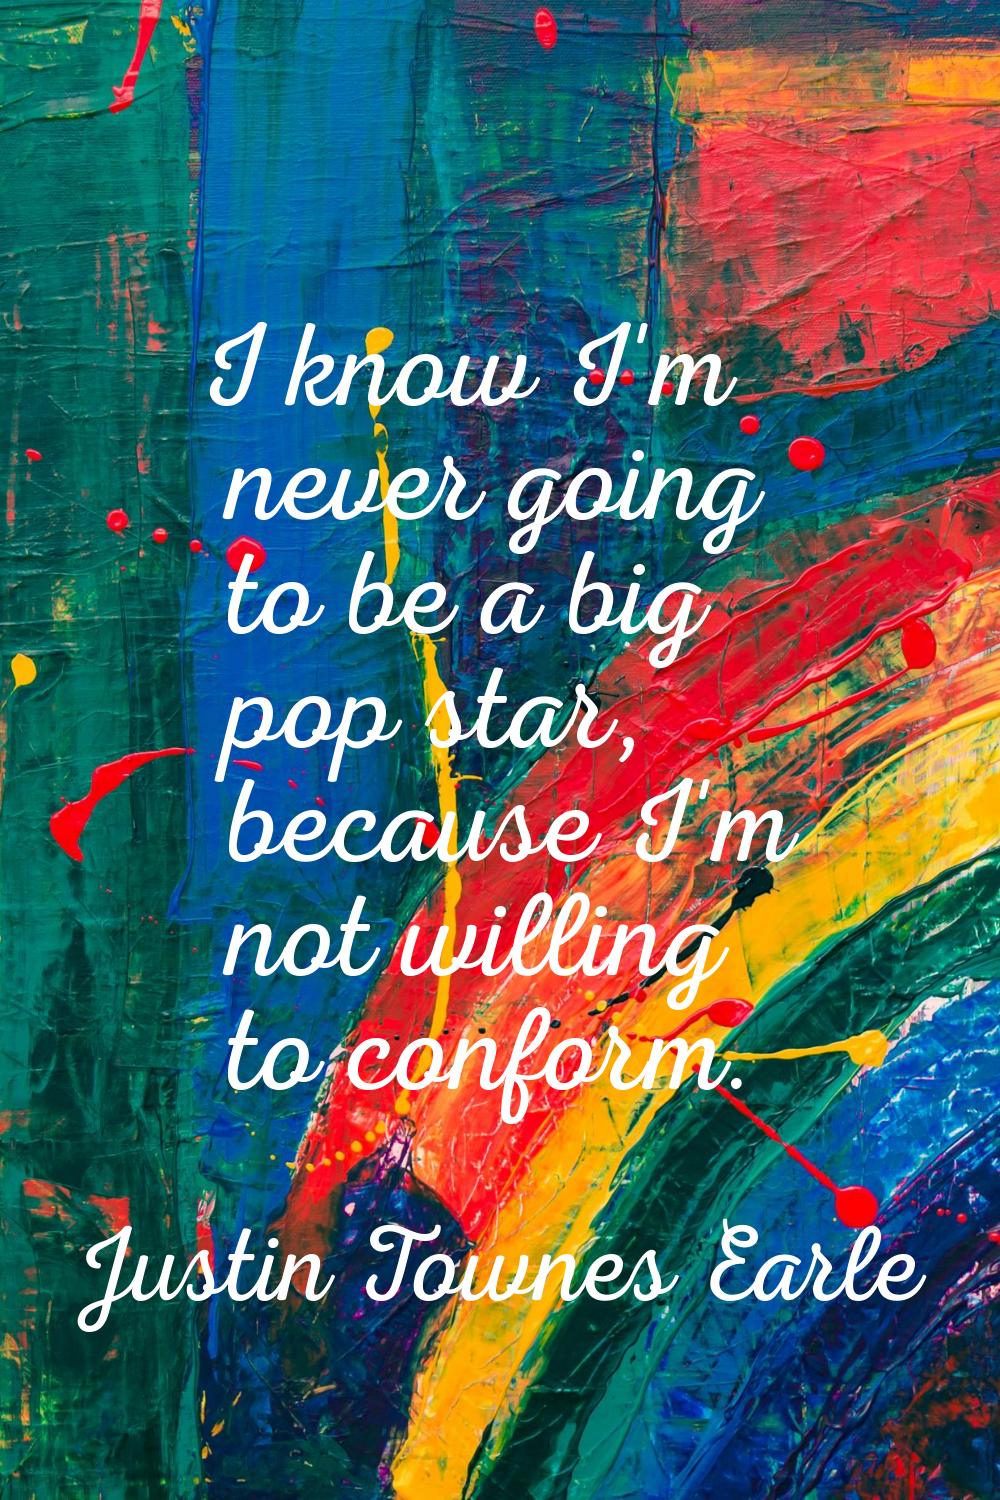 I know I'm never going to be a big pop star, because I'm not willing to conform.